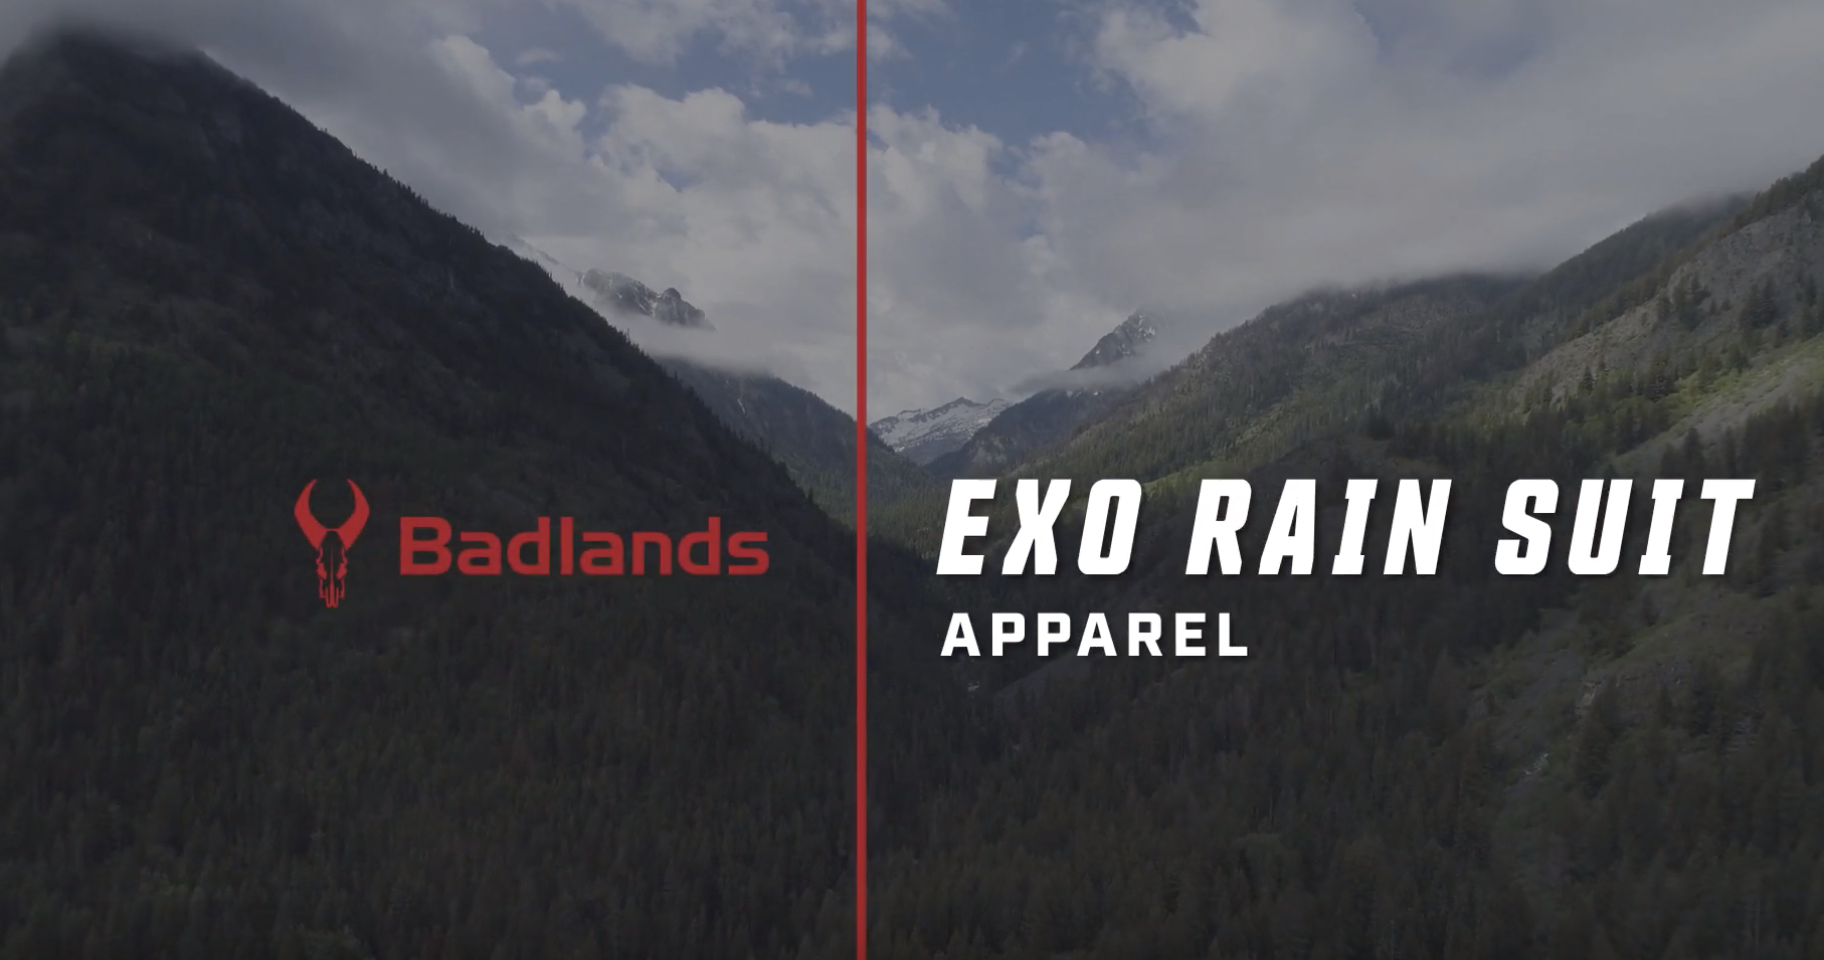 Learn more about Exo Rain Suit Apparel